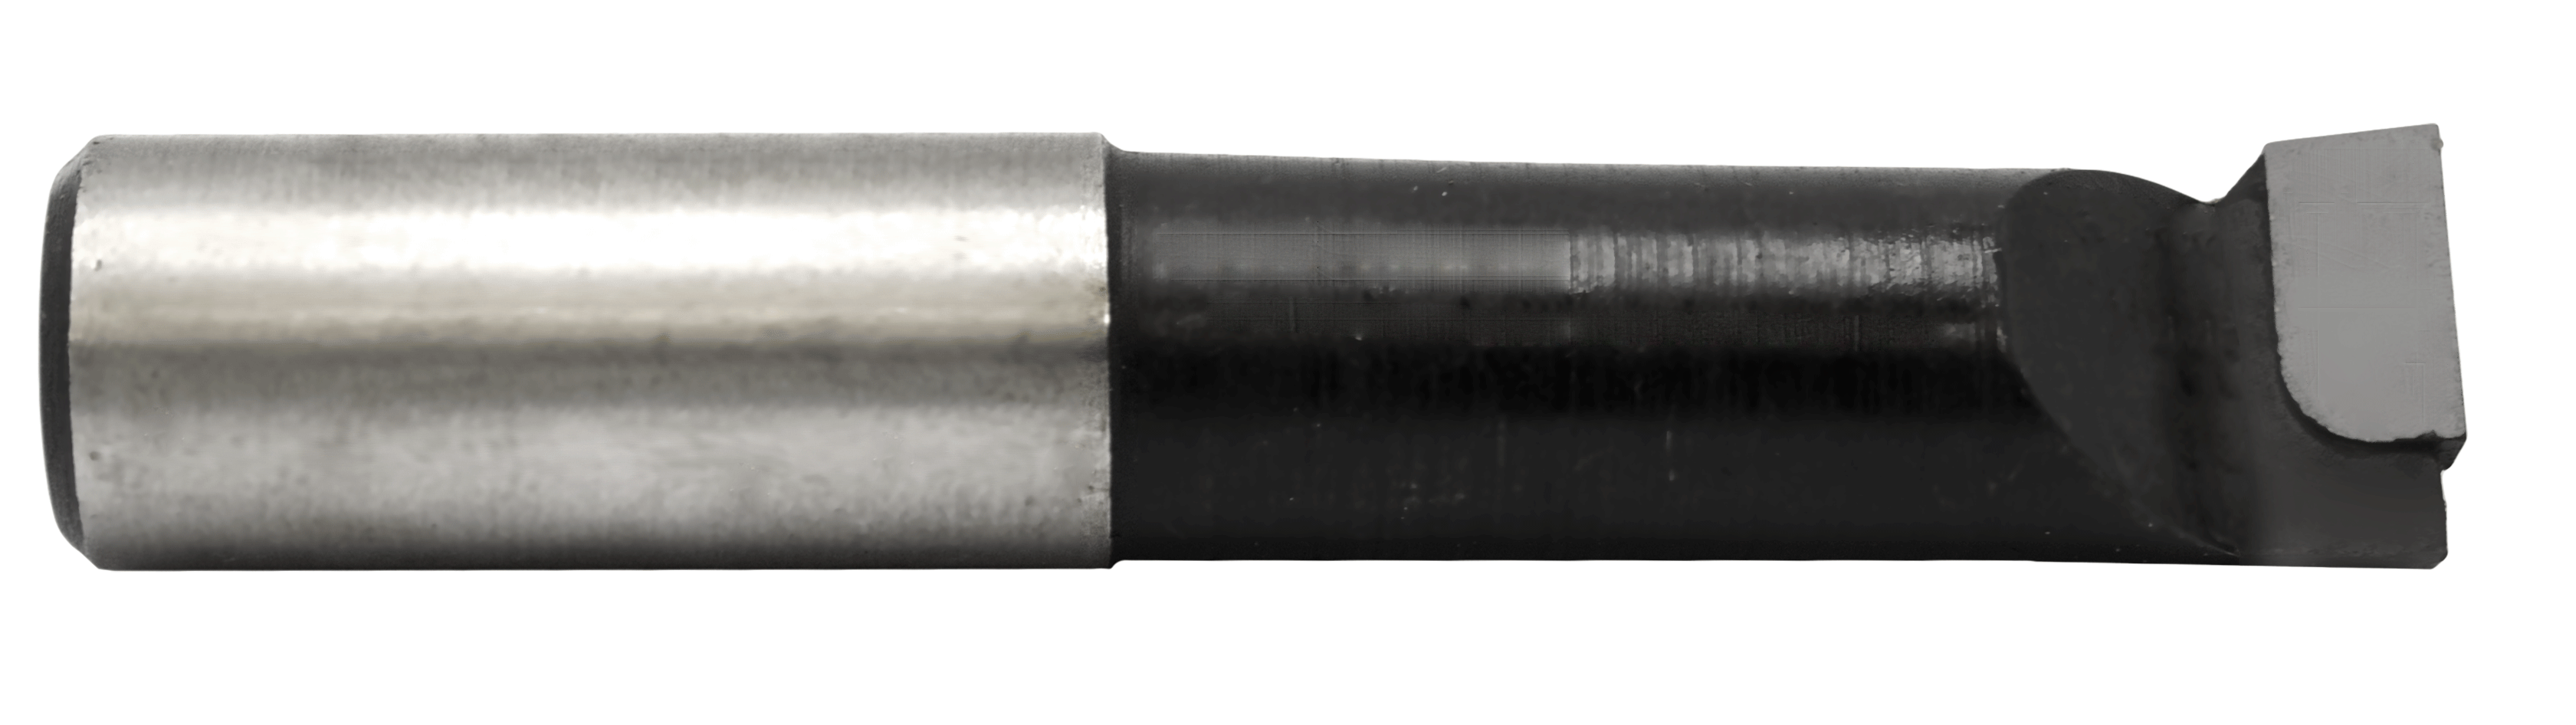 Super-Bore 3/4" C-6 for Steel Applications